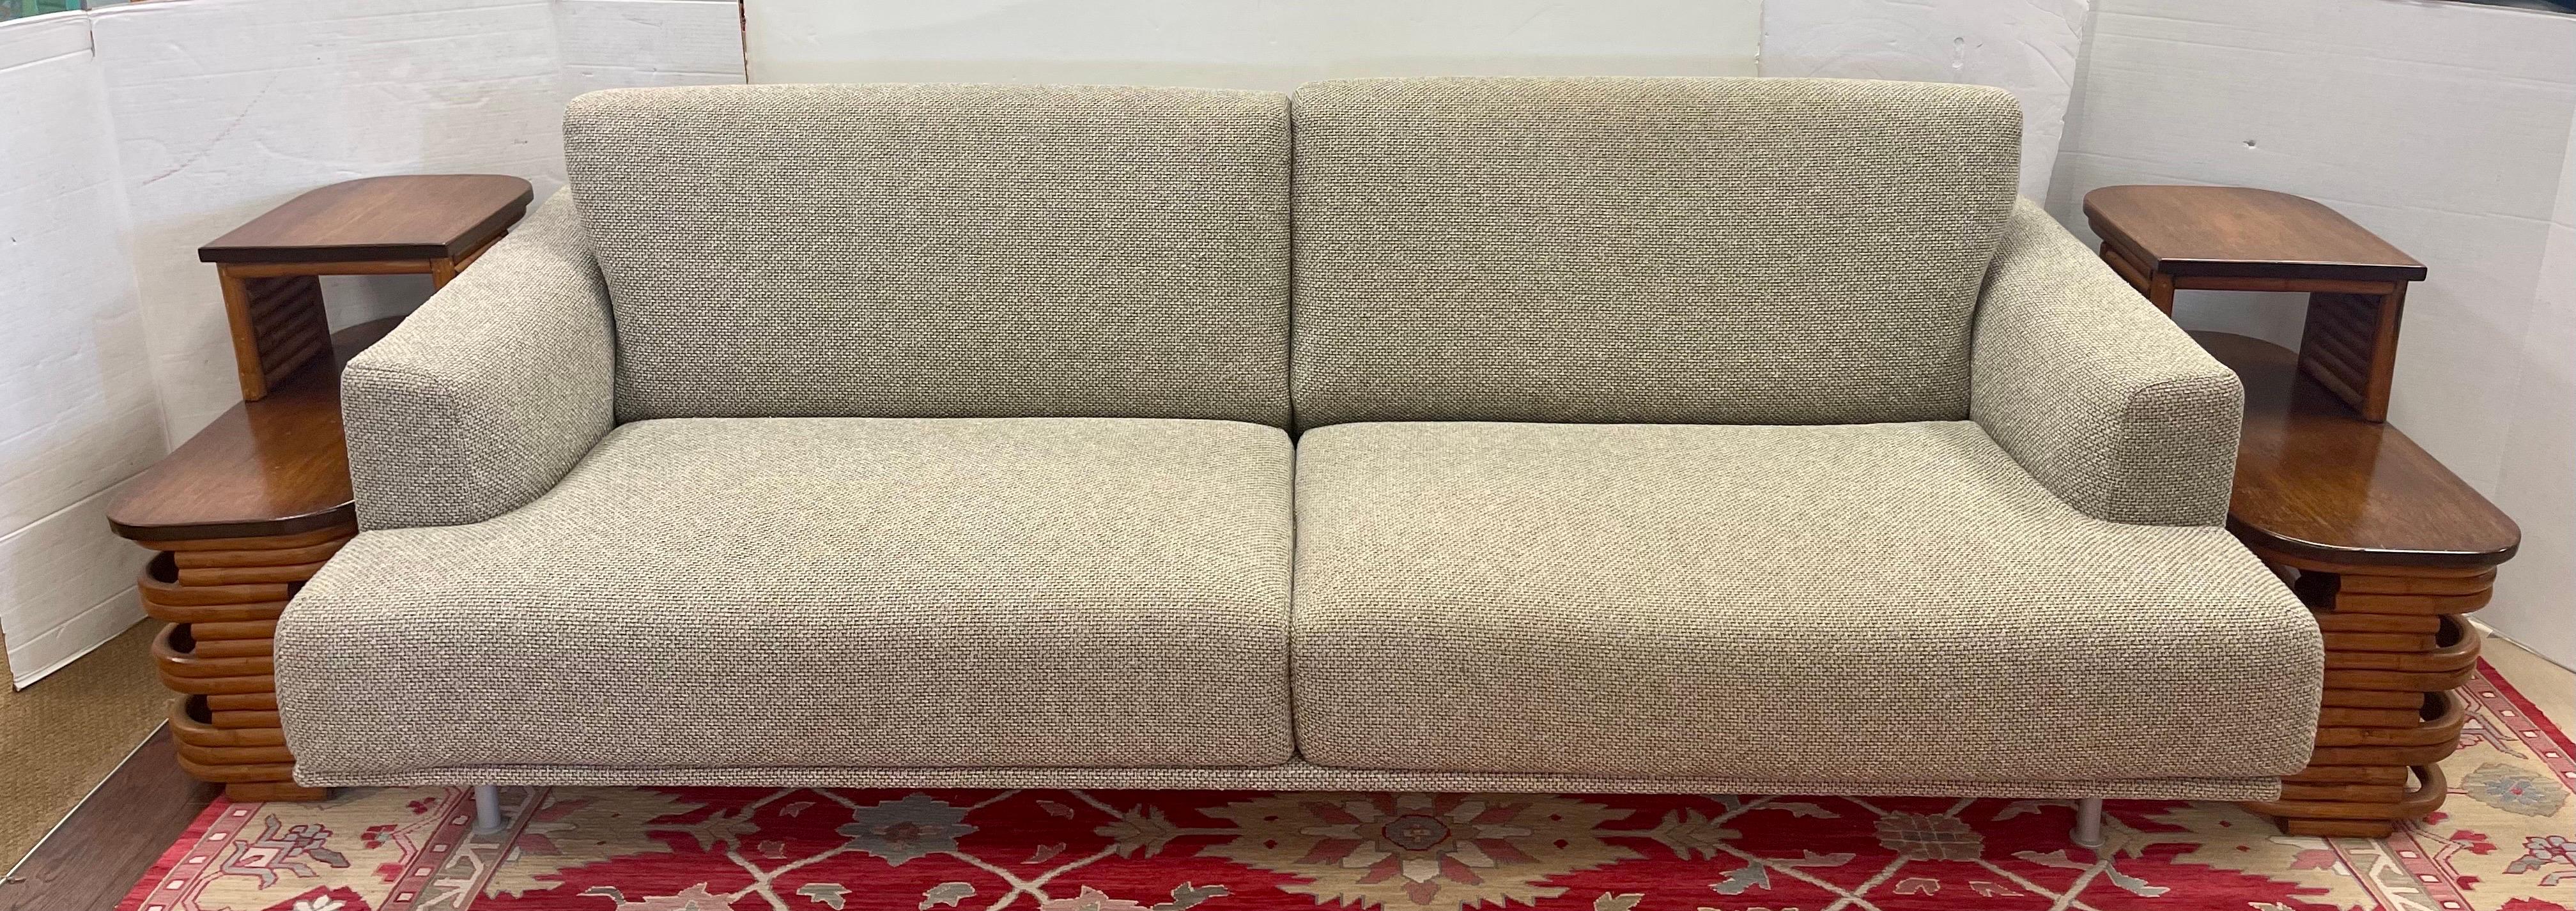 Rarely available Cassina three seat sofa with oatmeal fabric designed by renowned designer Piero Lissoni and coupled with Paul Frankl side tables also available. A marriage made in heaven! All dimensions of sofa are below. Great condition. Great